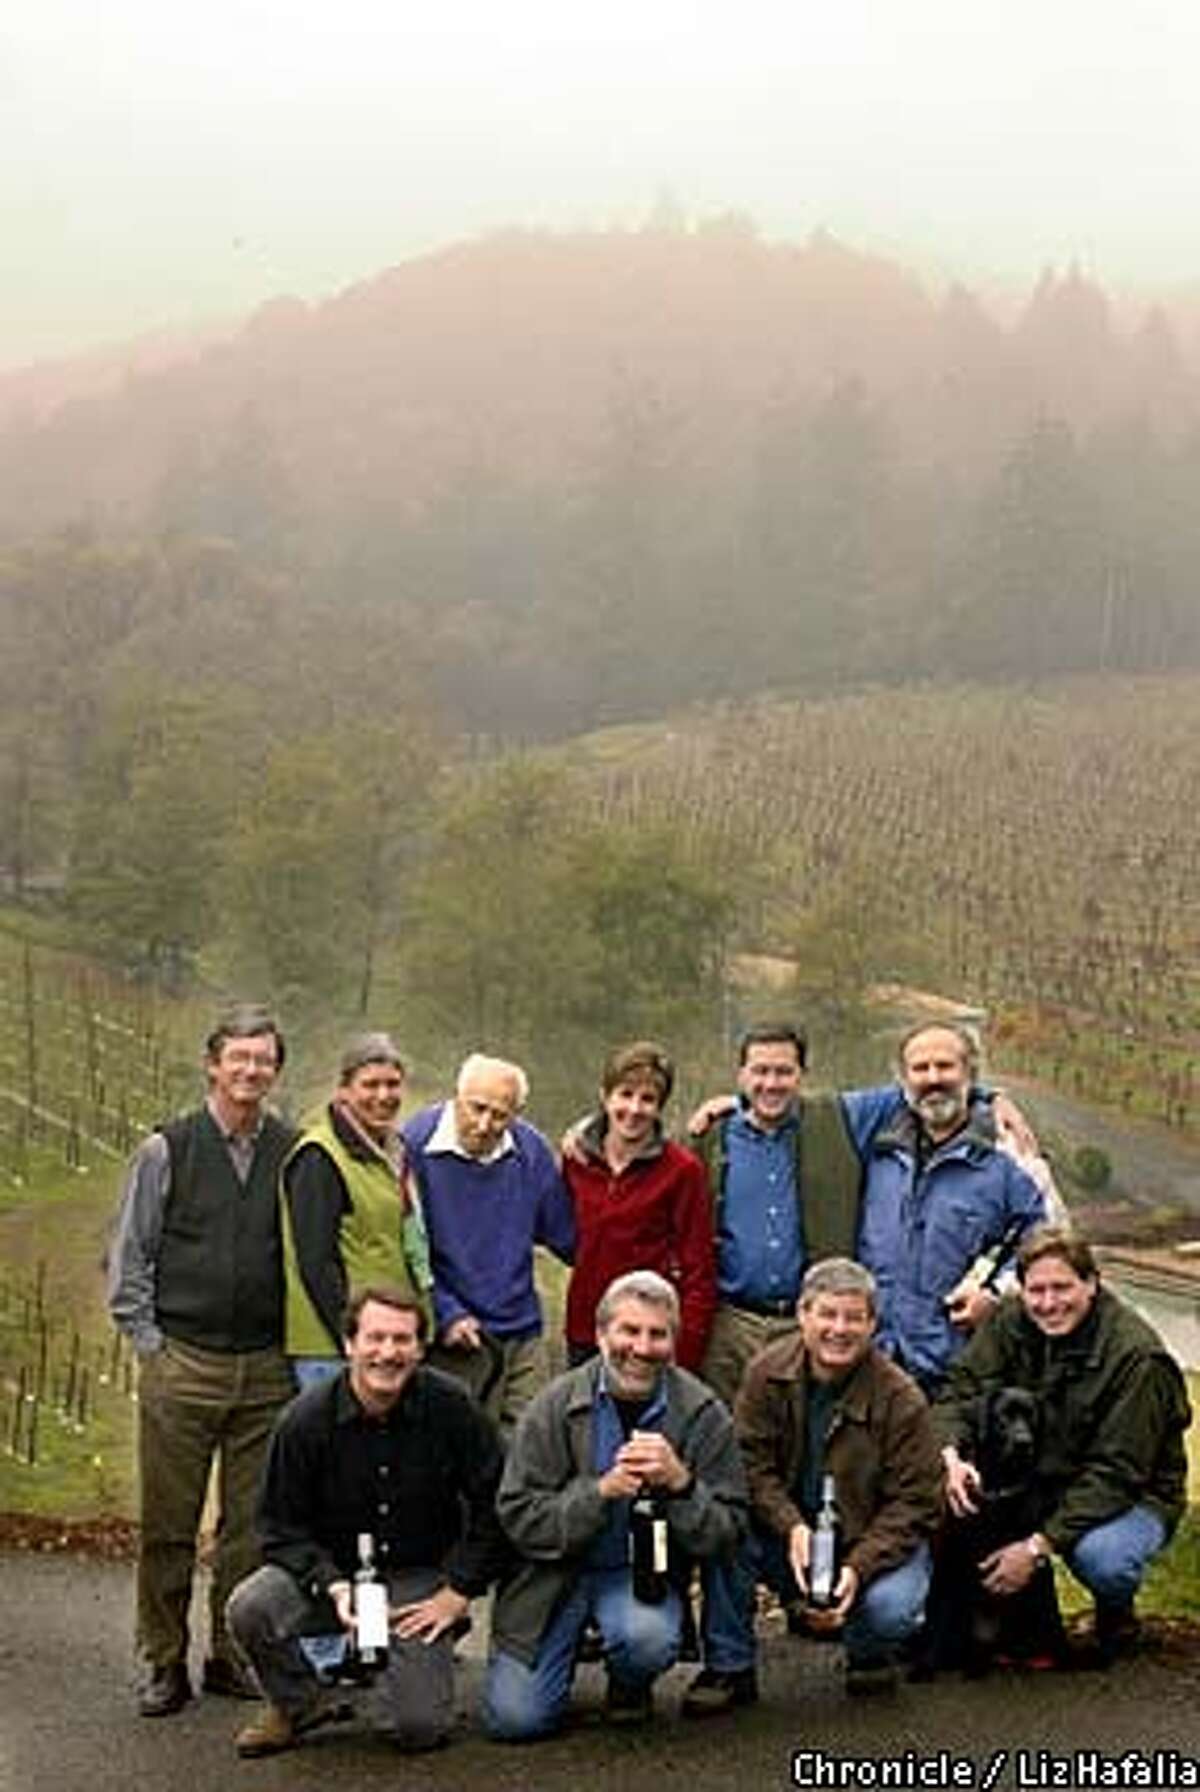 Diamond Mountain vintners meet at the fog-shrouded hillside of Diamond Creek Vineyards in Calistoga. They include (back row, left to right) Bill Dyer, Dawnine Dyer, owners of Dyer Vineyards; Al Brounstein, owner of Diamond Creek Vineyards; Maureen Taylor, co-owner of Diamond Terrace; Rudy von strasser, owner of von Strasser Winery; and Phil Steinschriber, winemaker at Diamond Creek Vineyards. Bottom row, left to right: Peter Thompson, owner of Andrew Geoffrey Vineyards; Gerard Zanzonico, winemaker at Stonegate Winery; Hal Taylor, co-owner of Diamond Terrace; and Rob Hunter, winemaker at Sterling Vineyards. Chronicle photo by Liz Hafalia